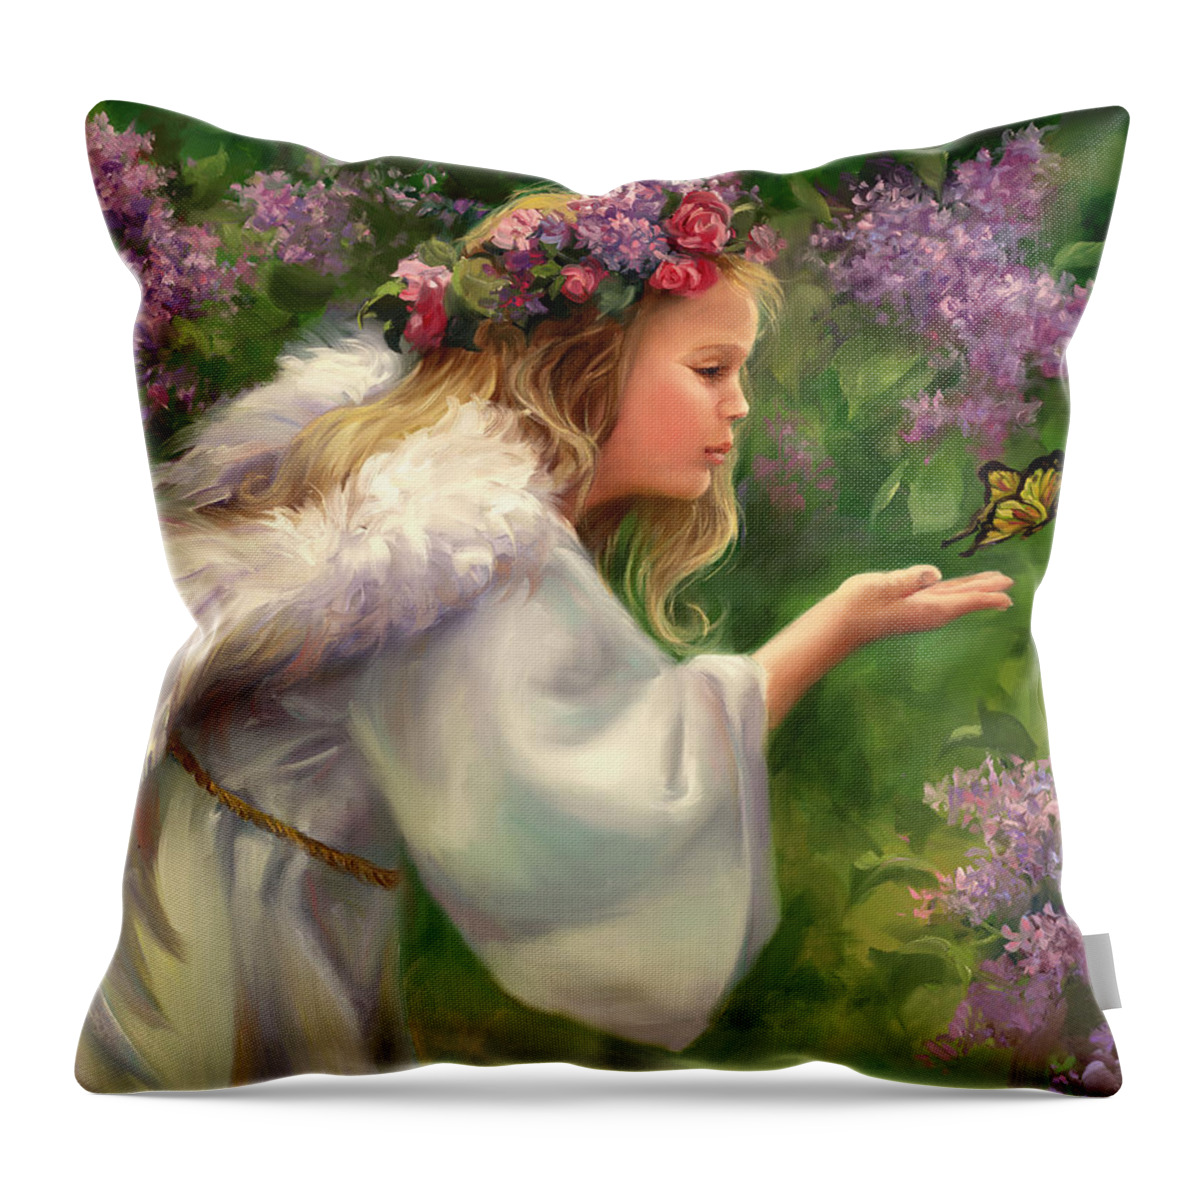 Angel Throw Pillow featuring the painting Lilac Angel by Laurie Snow Hein